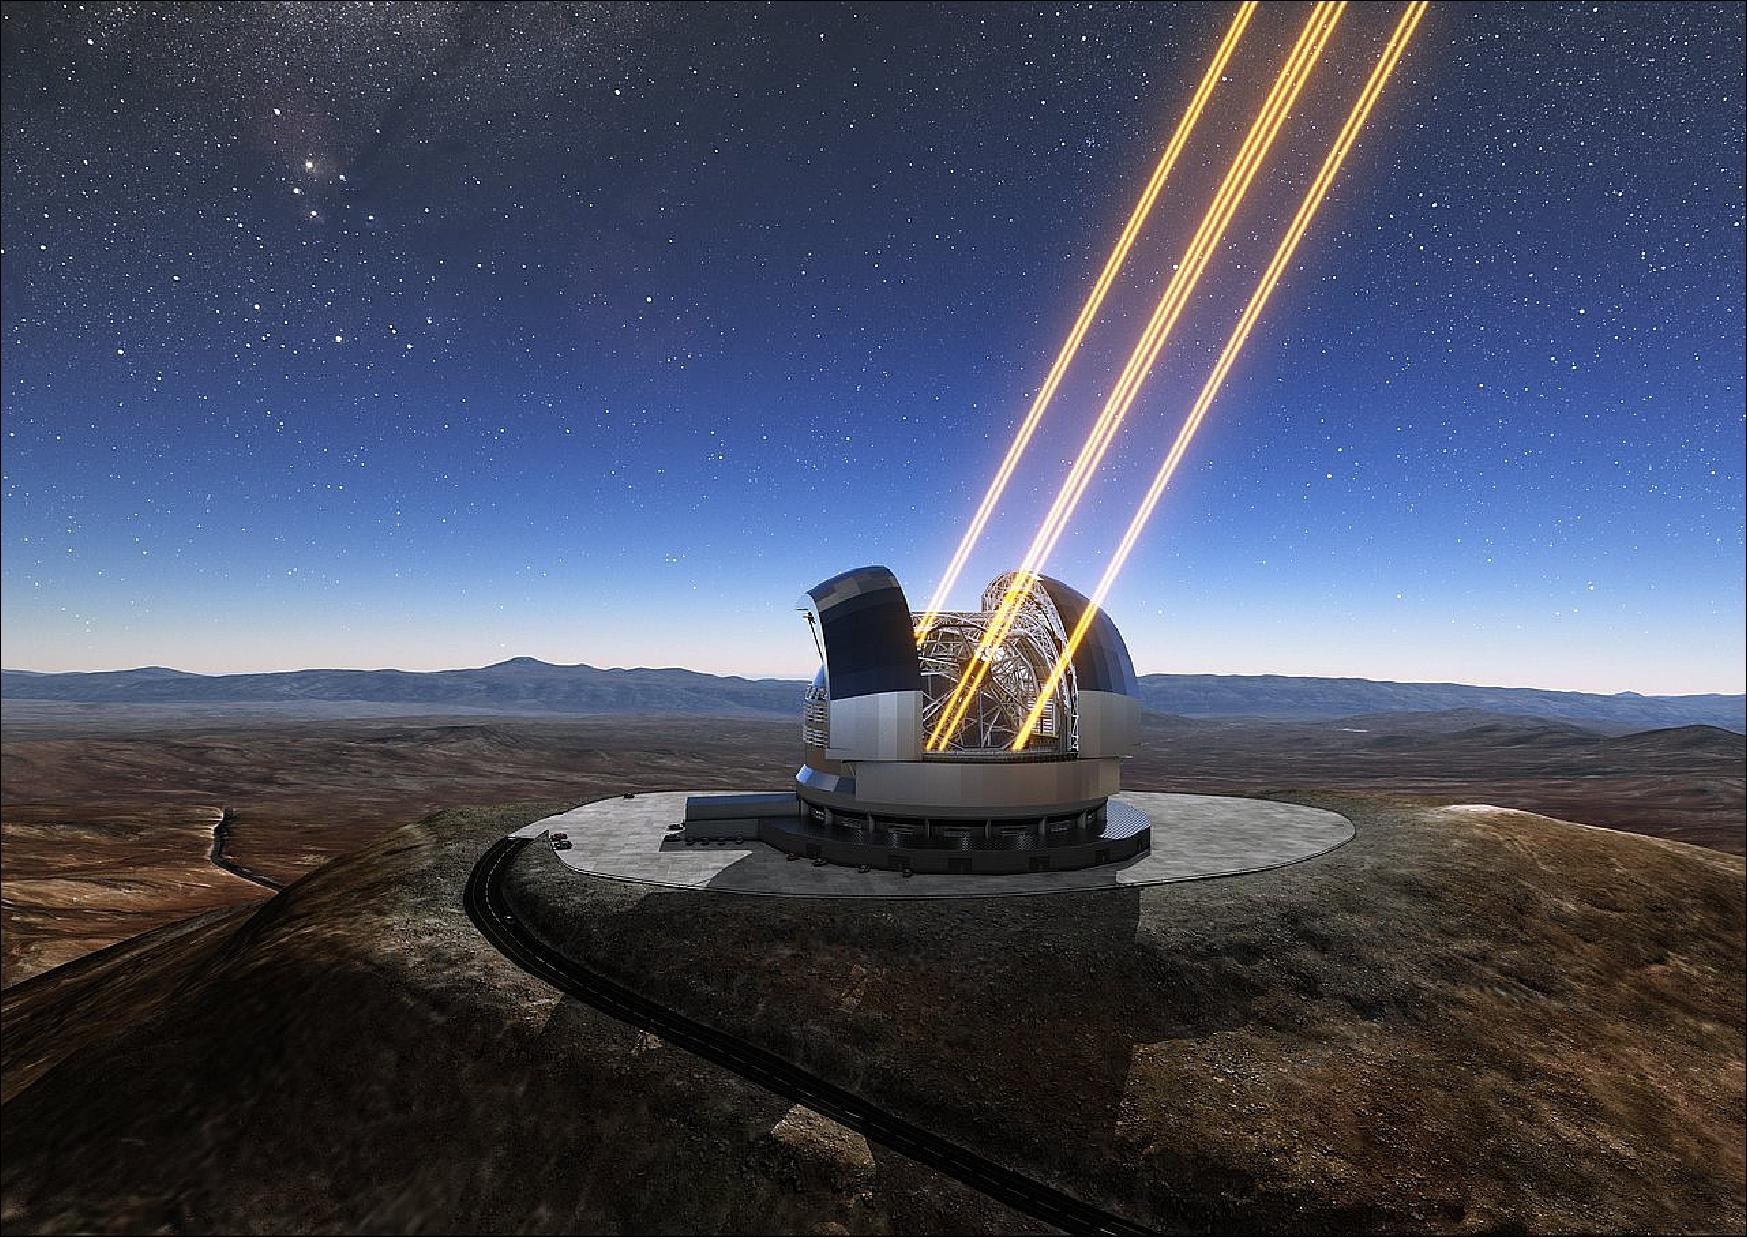 Figure 9: This artist's rendering shows the ELT (Extremely Large Telescope) in operation on Cerro Armazones in northern Chile. The telescope is shown using lasers to create artificial stars high in the atmosphere. The first stone ceremony for the telescope was attended by the President of Chile, Michelle Bachelet Jeria, on 26 May 2017 (image credit: ESO/L. Calçada) 5)